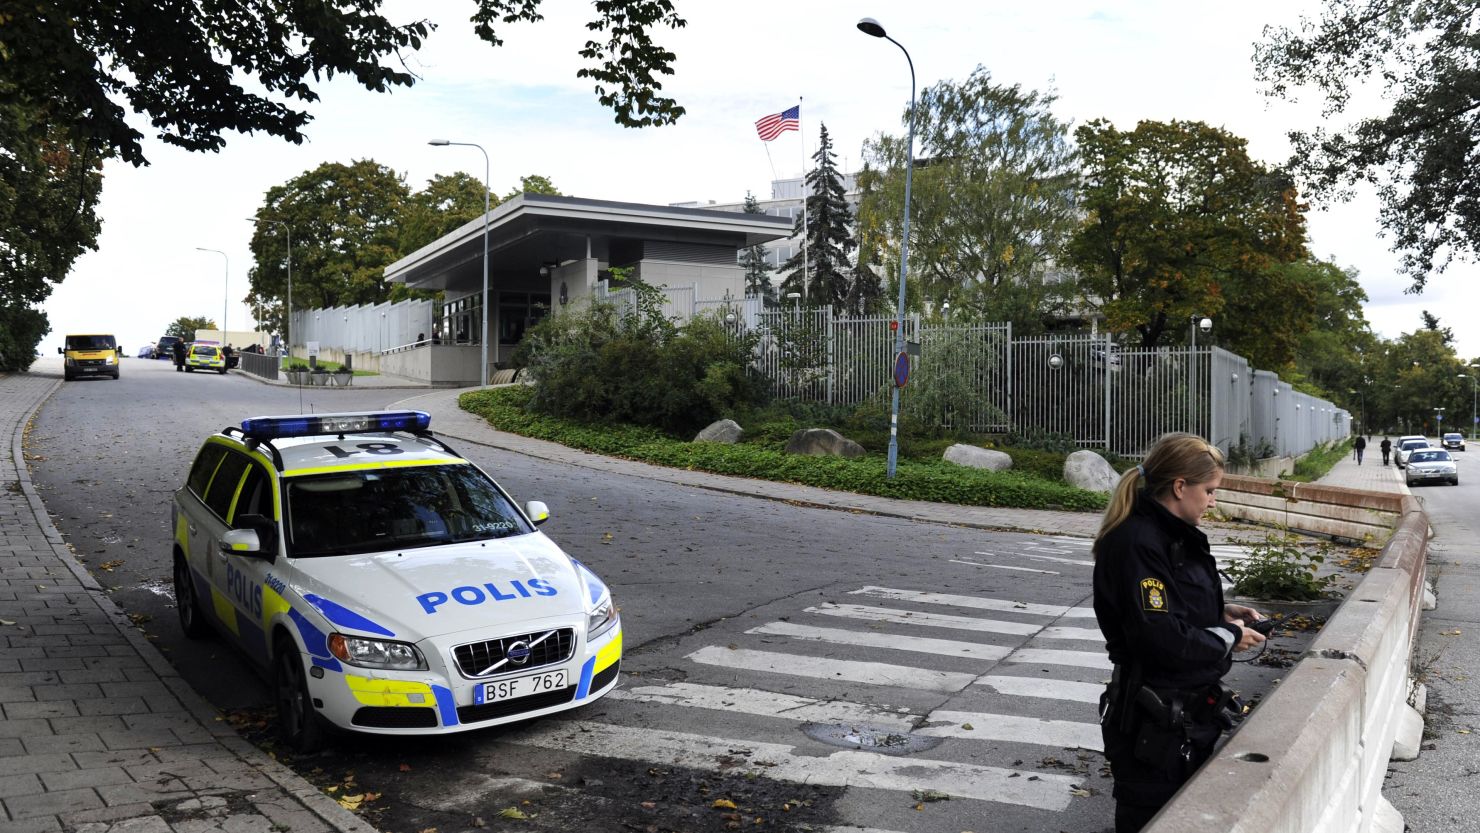 Police guard the U.S. embassy in Stockholm, Sweden during a bomb scare on September 17, 2010.